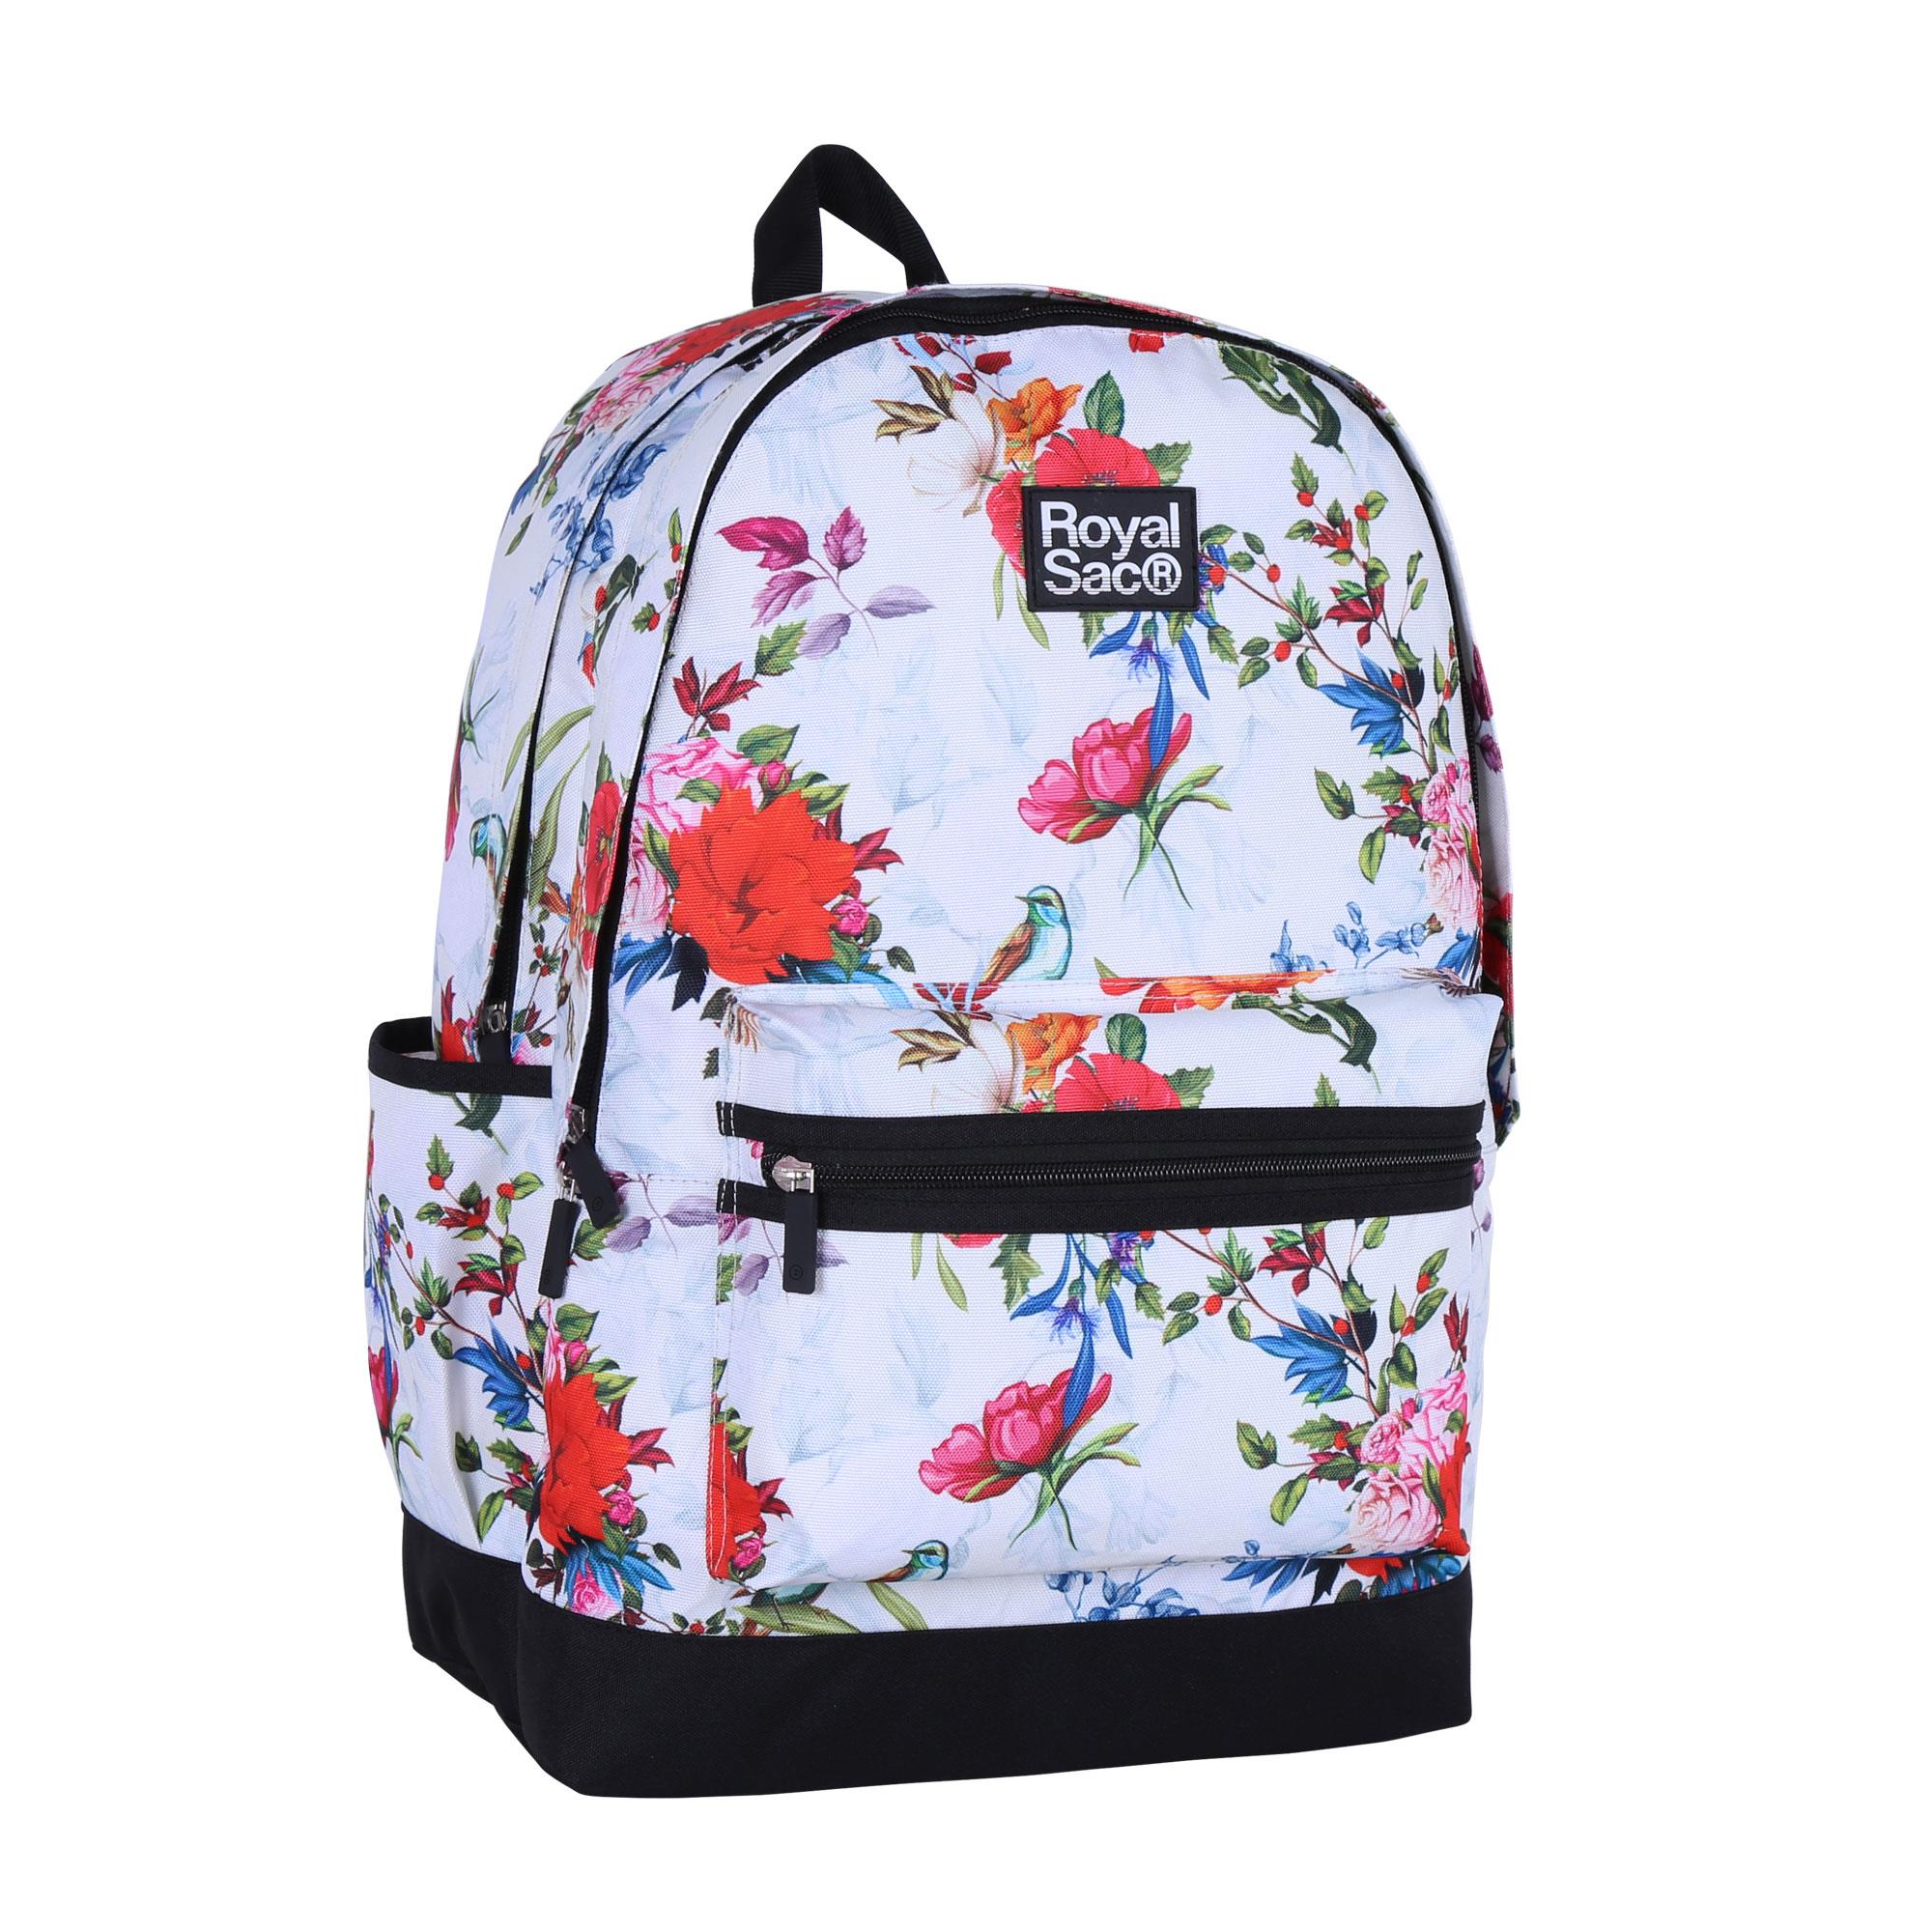 Wholesale Discount Best Selling Backpack Manufacture -
 B1062-006 600D Polyester – Herbert